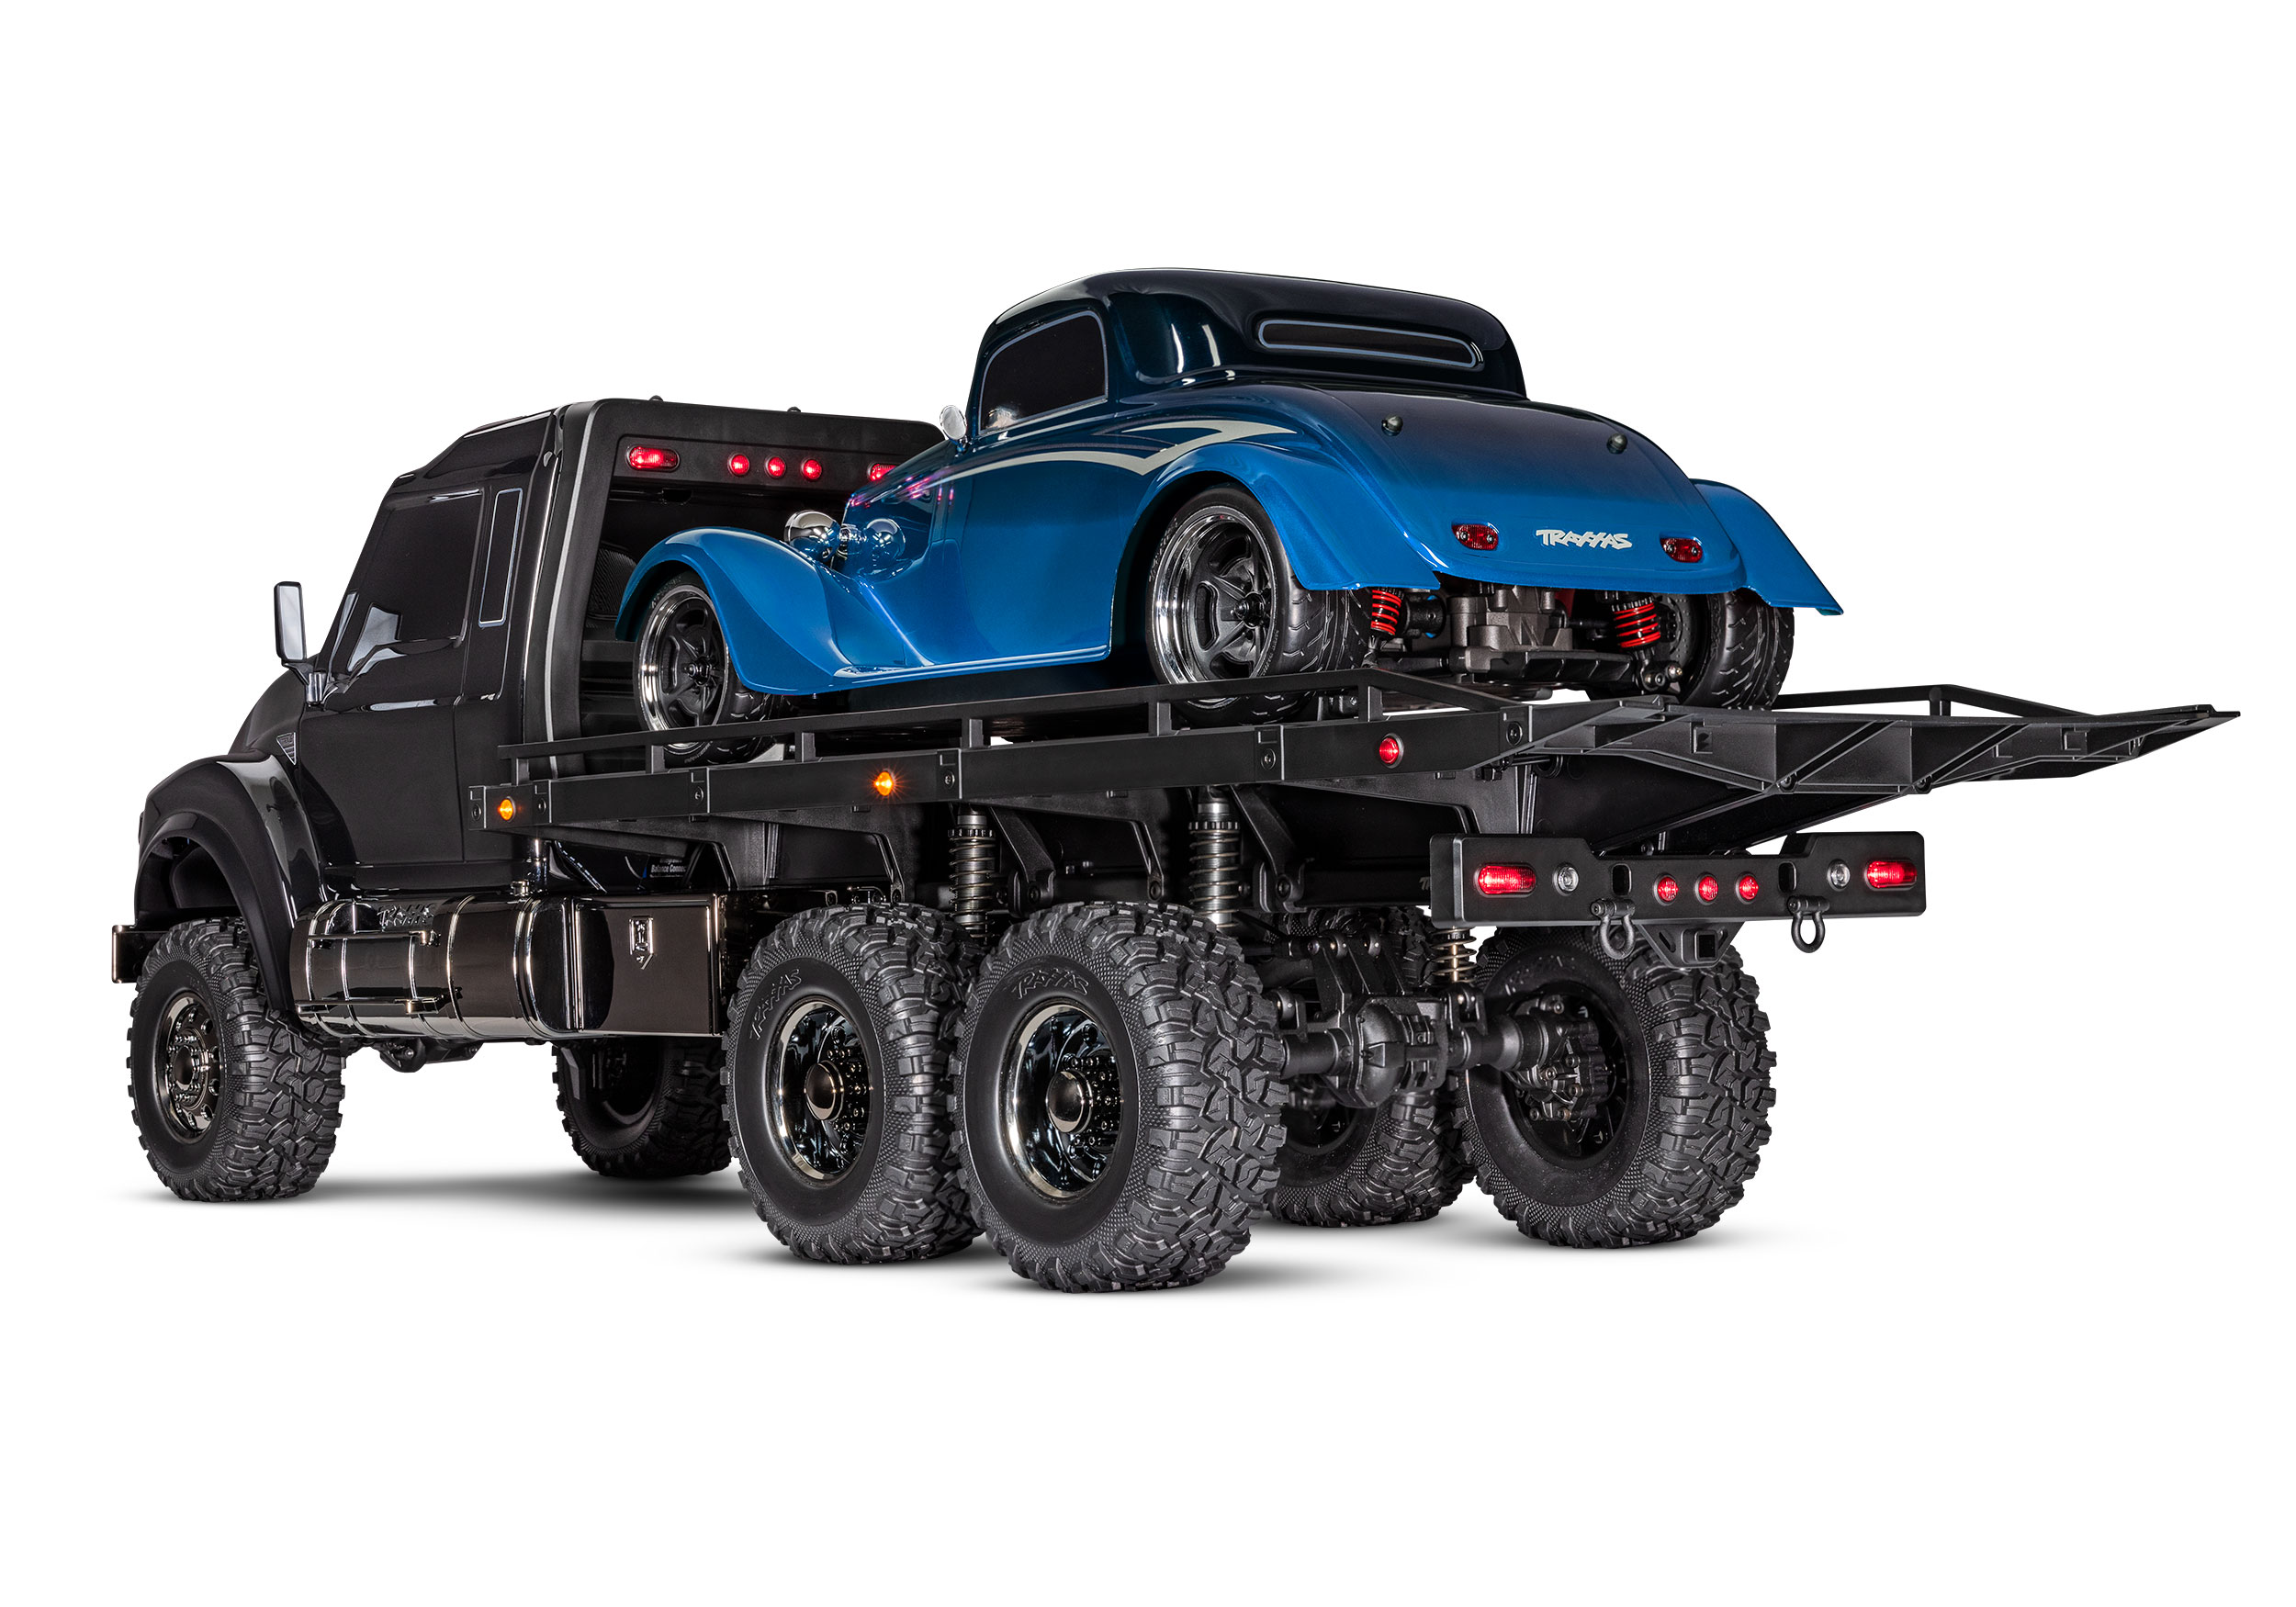 88086 4 TRX 6 Flatbed Hauler 3qtr Rear With Hot Rod